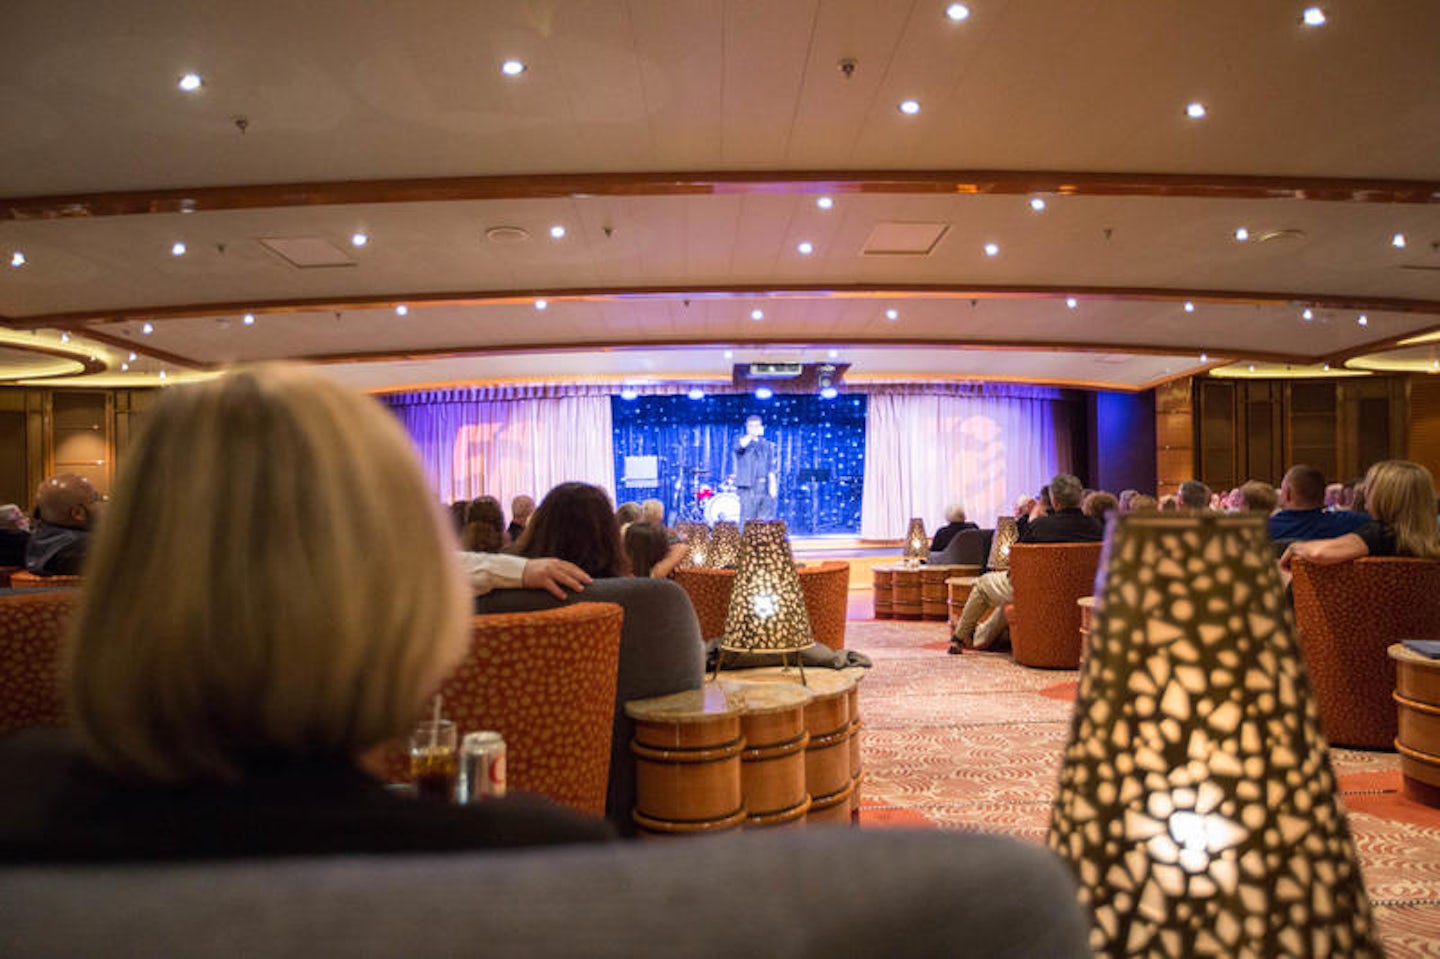 Comedy Magic Show in the Vista Lounge on Regal Princess